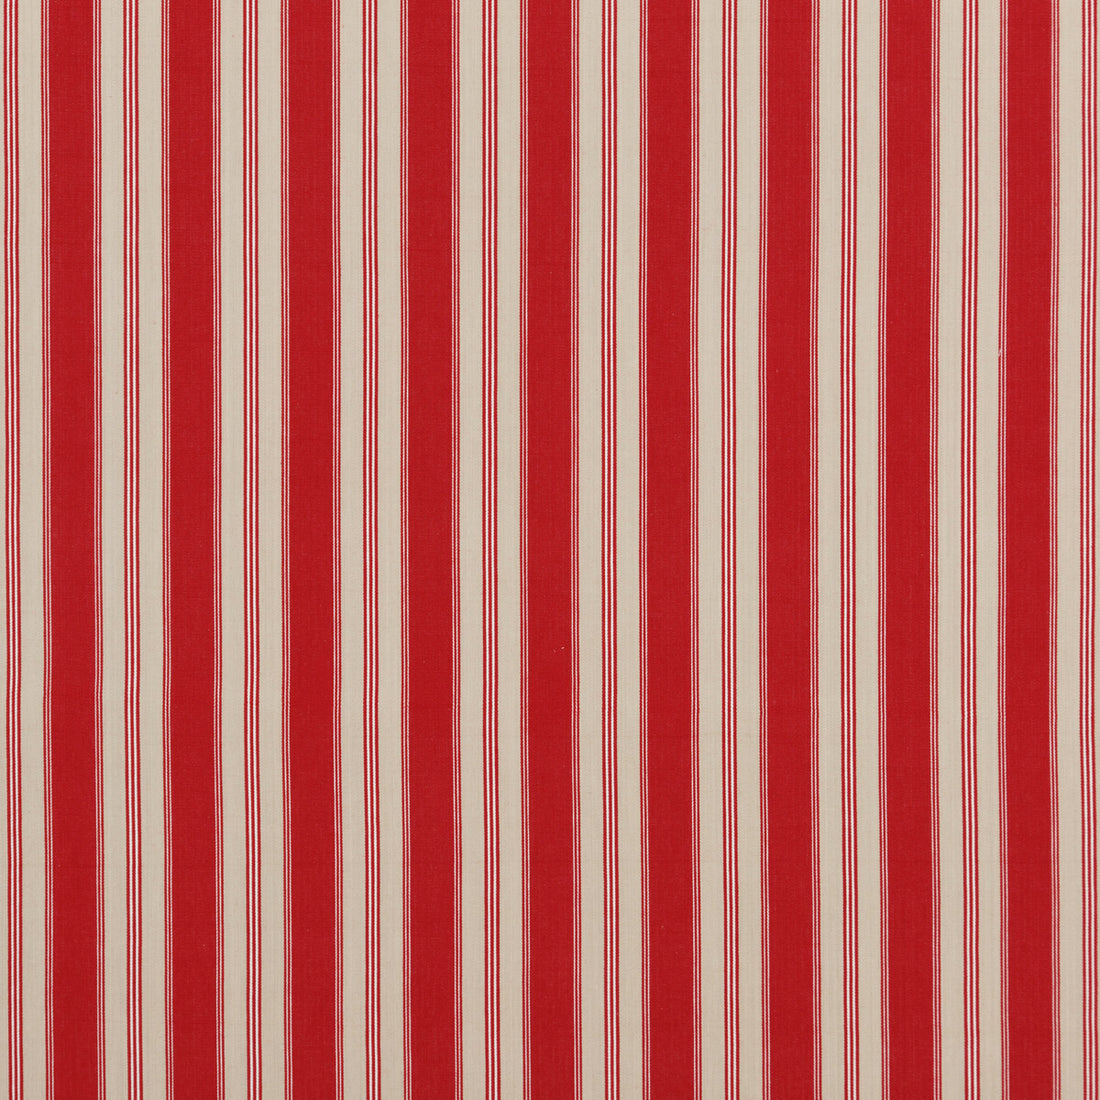 Tango Ticking fabric in red color - pattern PF50430.4.0 - by Baker Lifestyle in the Carnival collection